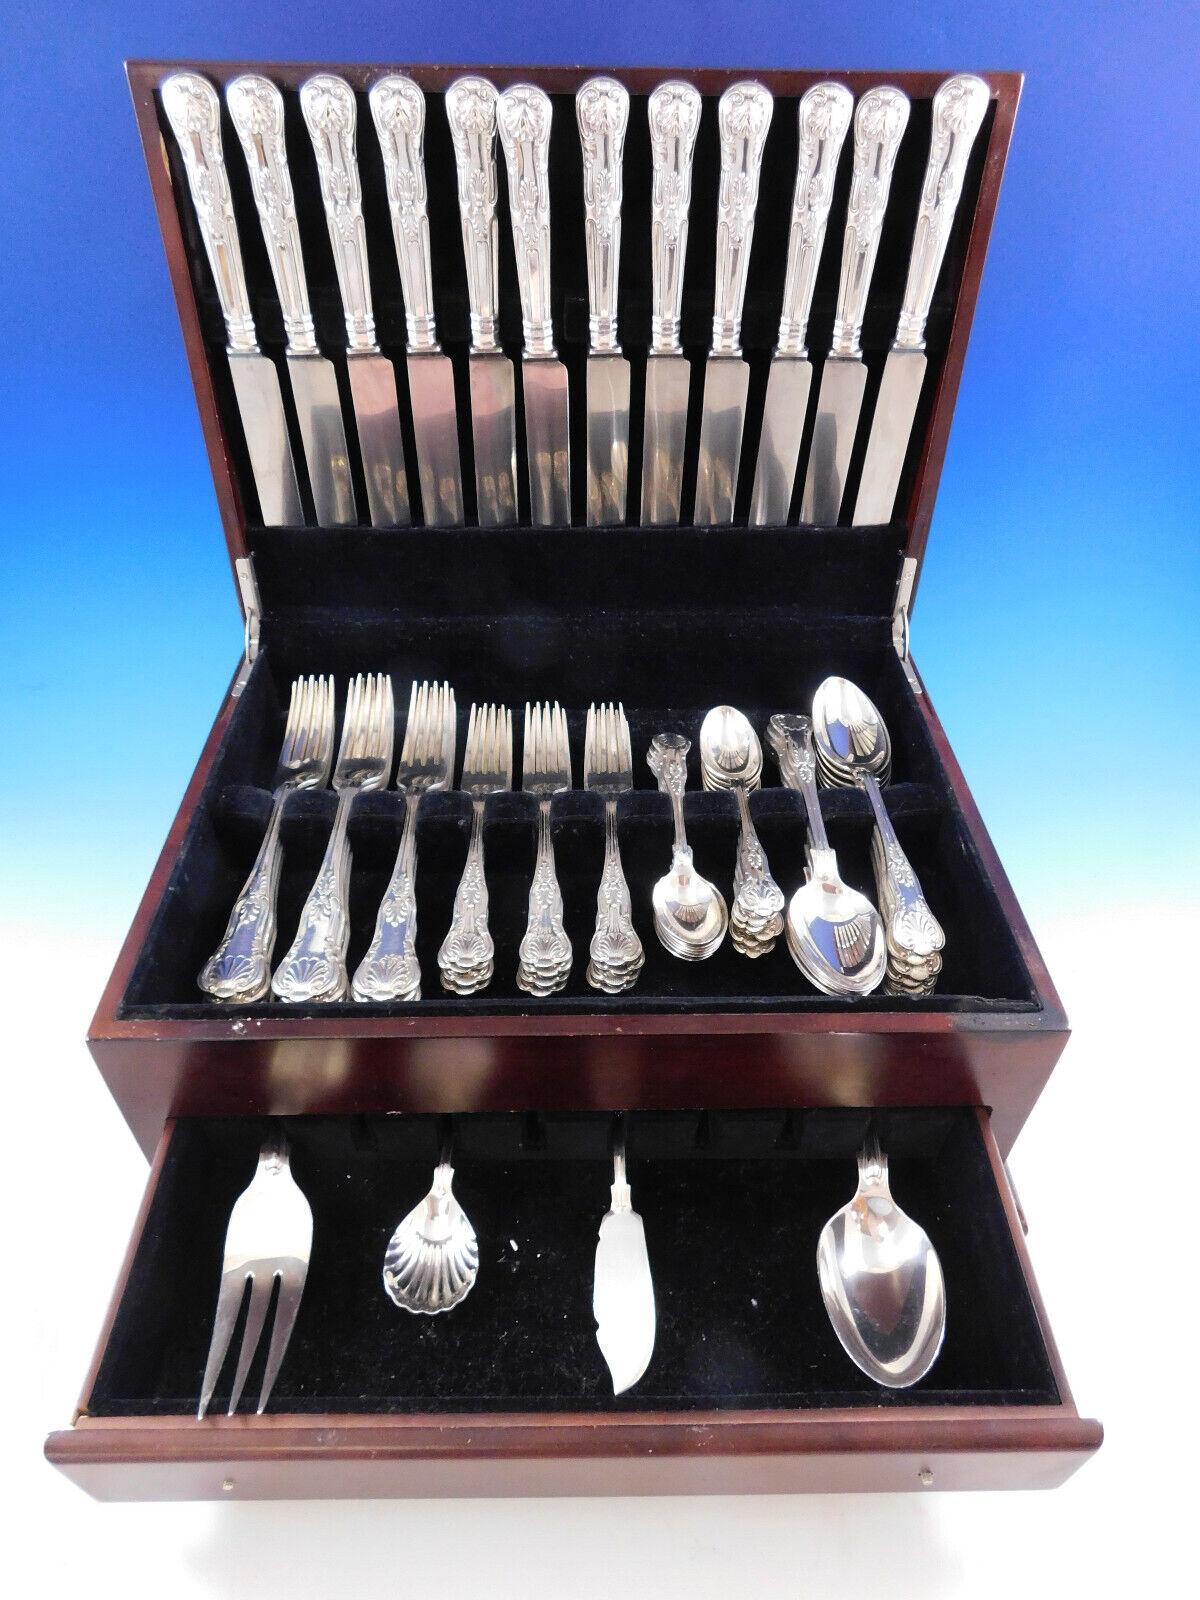 C.J. Vander was the last of England's preeminent silver firms, creating exceptional silver masterpieces using the time-honored traditions of the silversmith's art. In fact, they were one of the last remaining English flatware makers to employ the